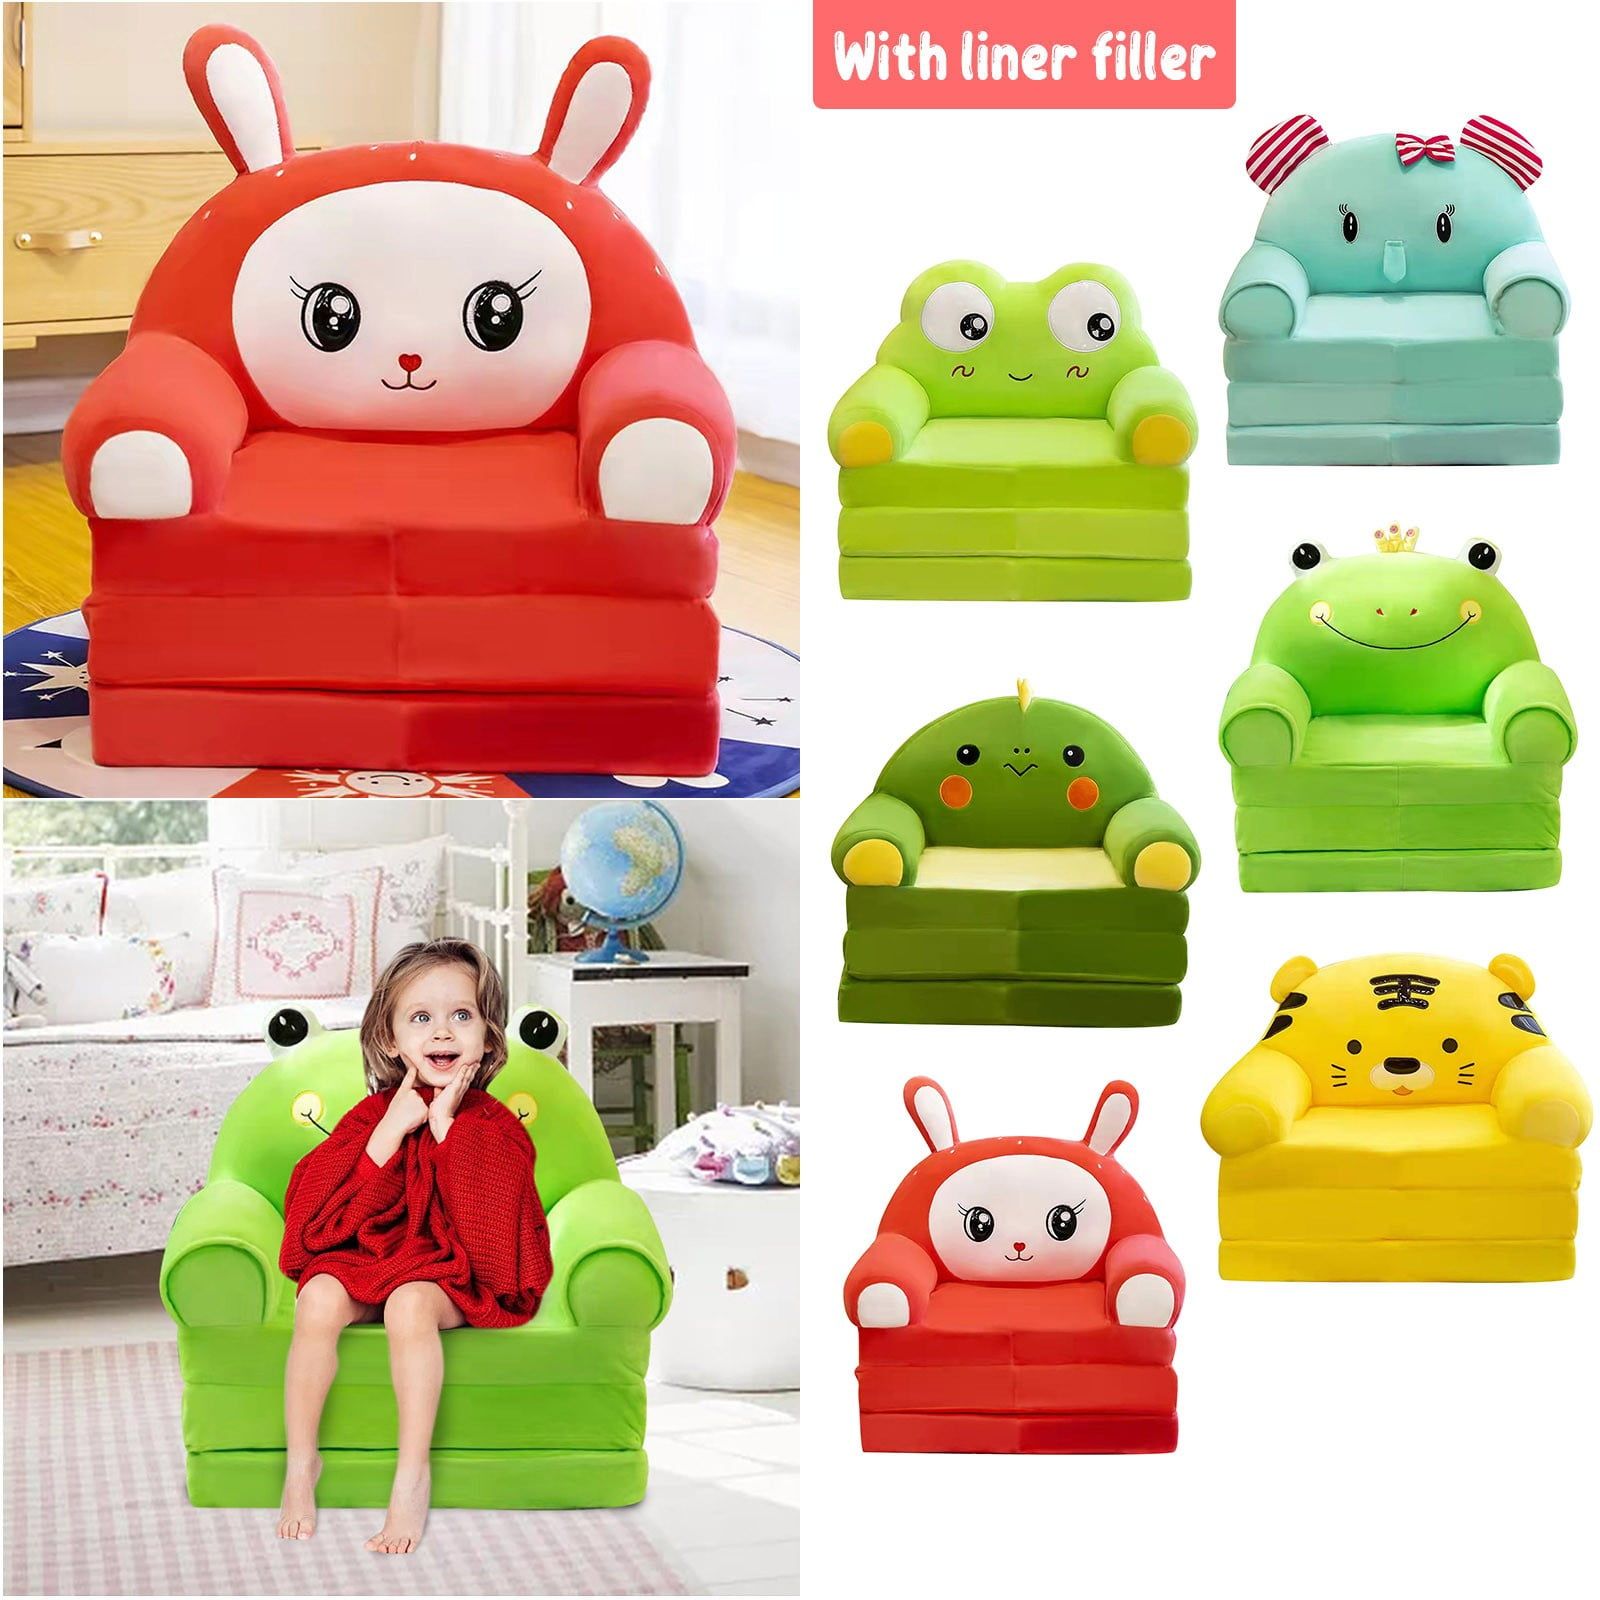 Foraging Dimple Plush Foldable Kids Sofa Backrest Armchair 2 In 1 Pertaining To 2 In 1 Foldable Children&#039;s Sofa Beds (View 12 of 20)